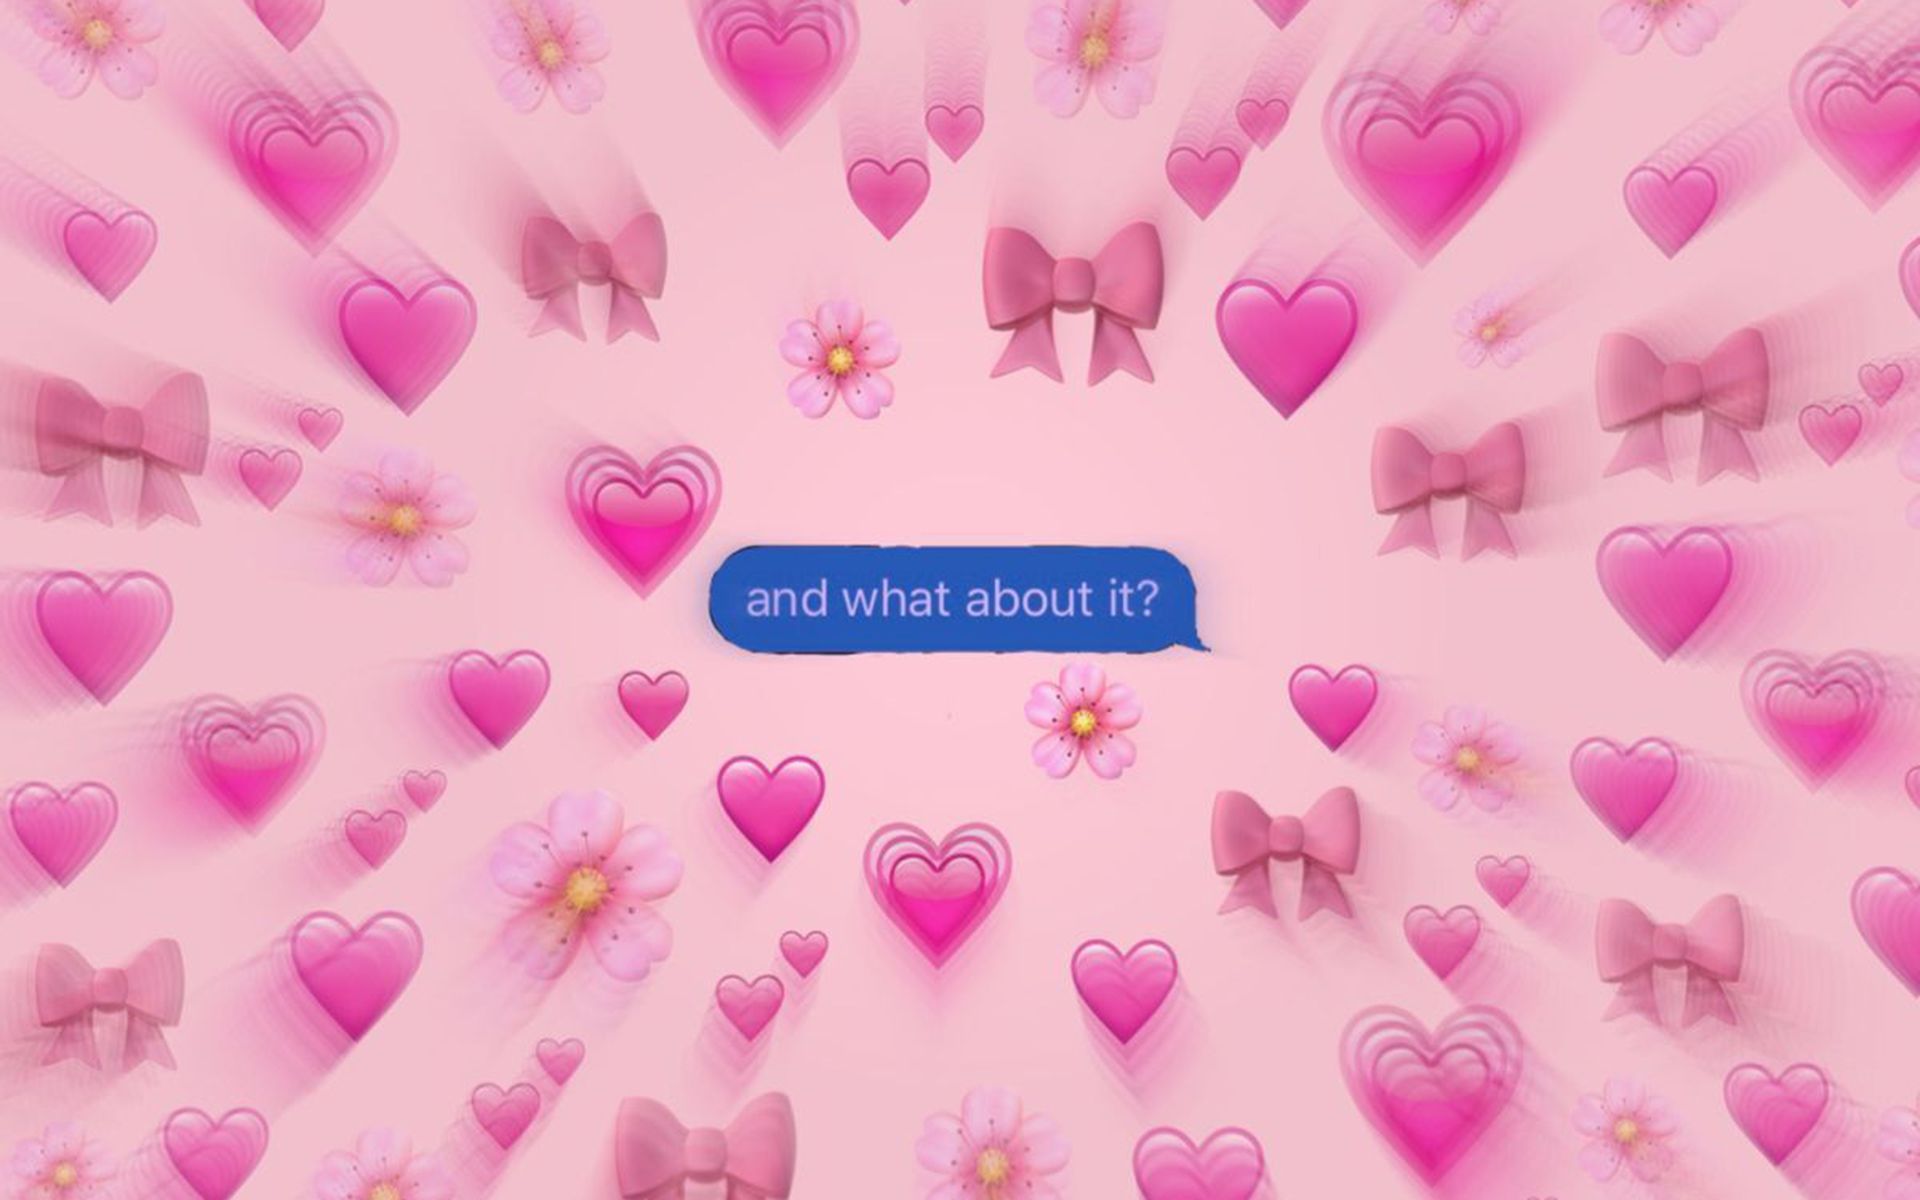 A pink background with hearts and bows, with a blue chat bubble that says 